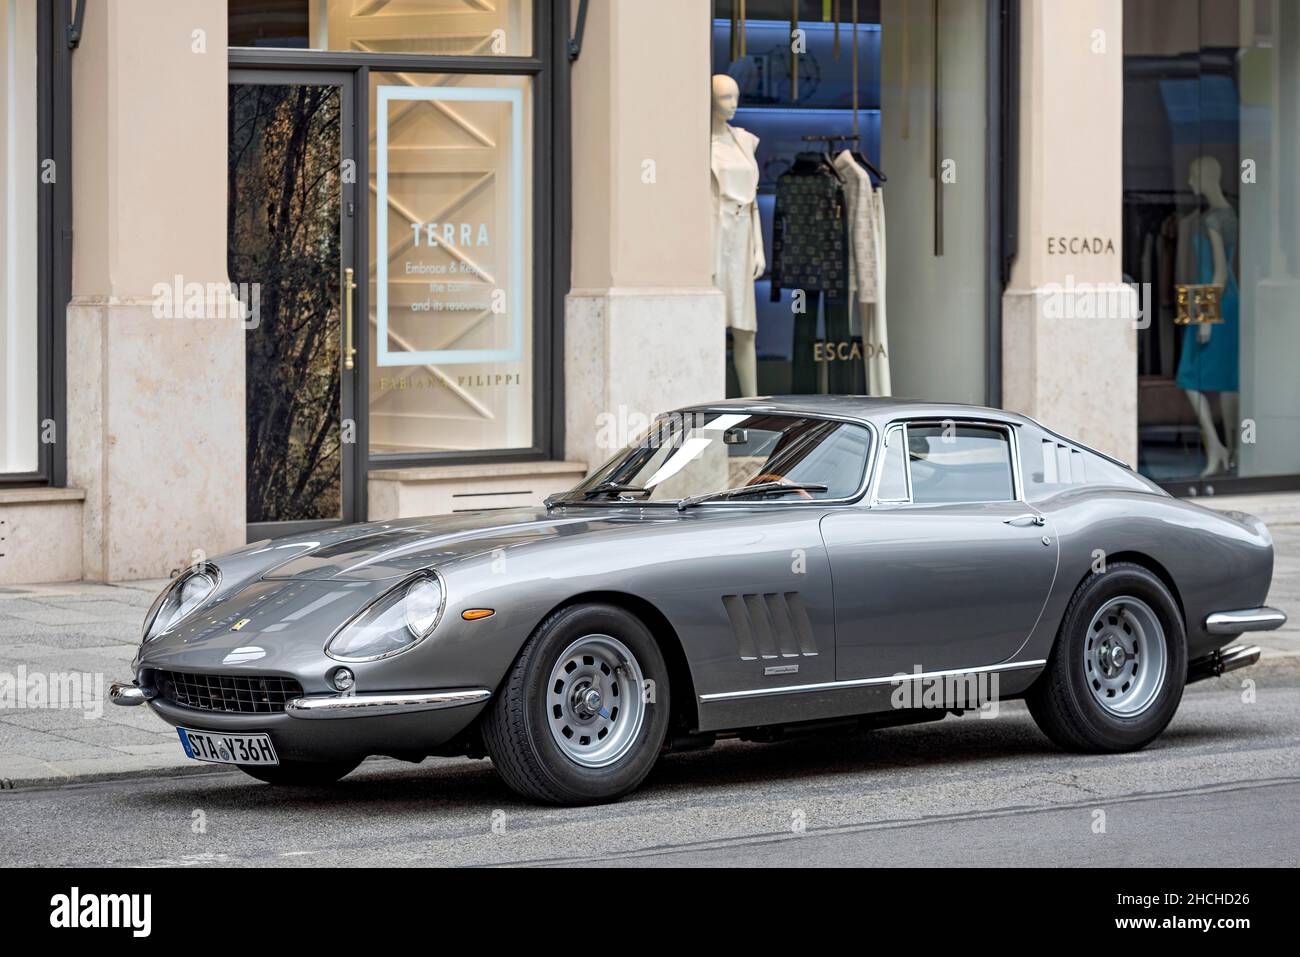 Parked vintage sports car Ferrari 275 GTB4, year of construction 1966 in front of exclusive fashion shop Escada, Maximilianstrasse, Munich, Upper Stock Photo